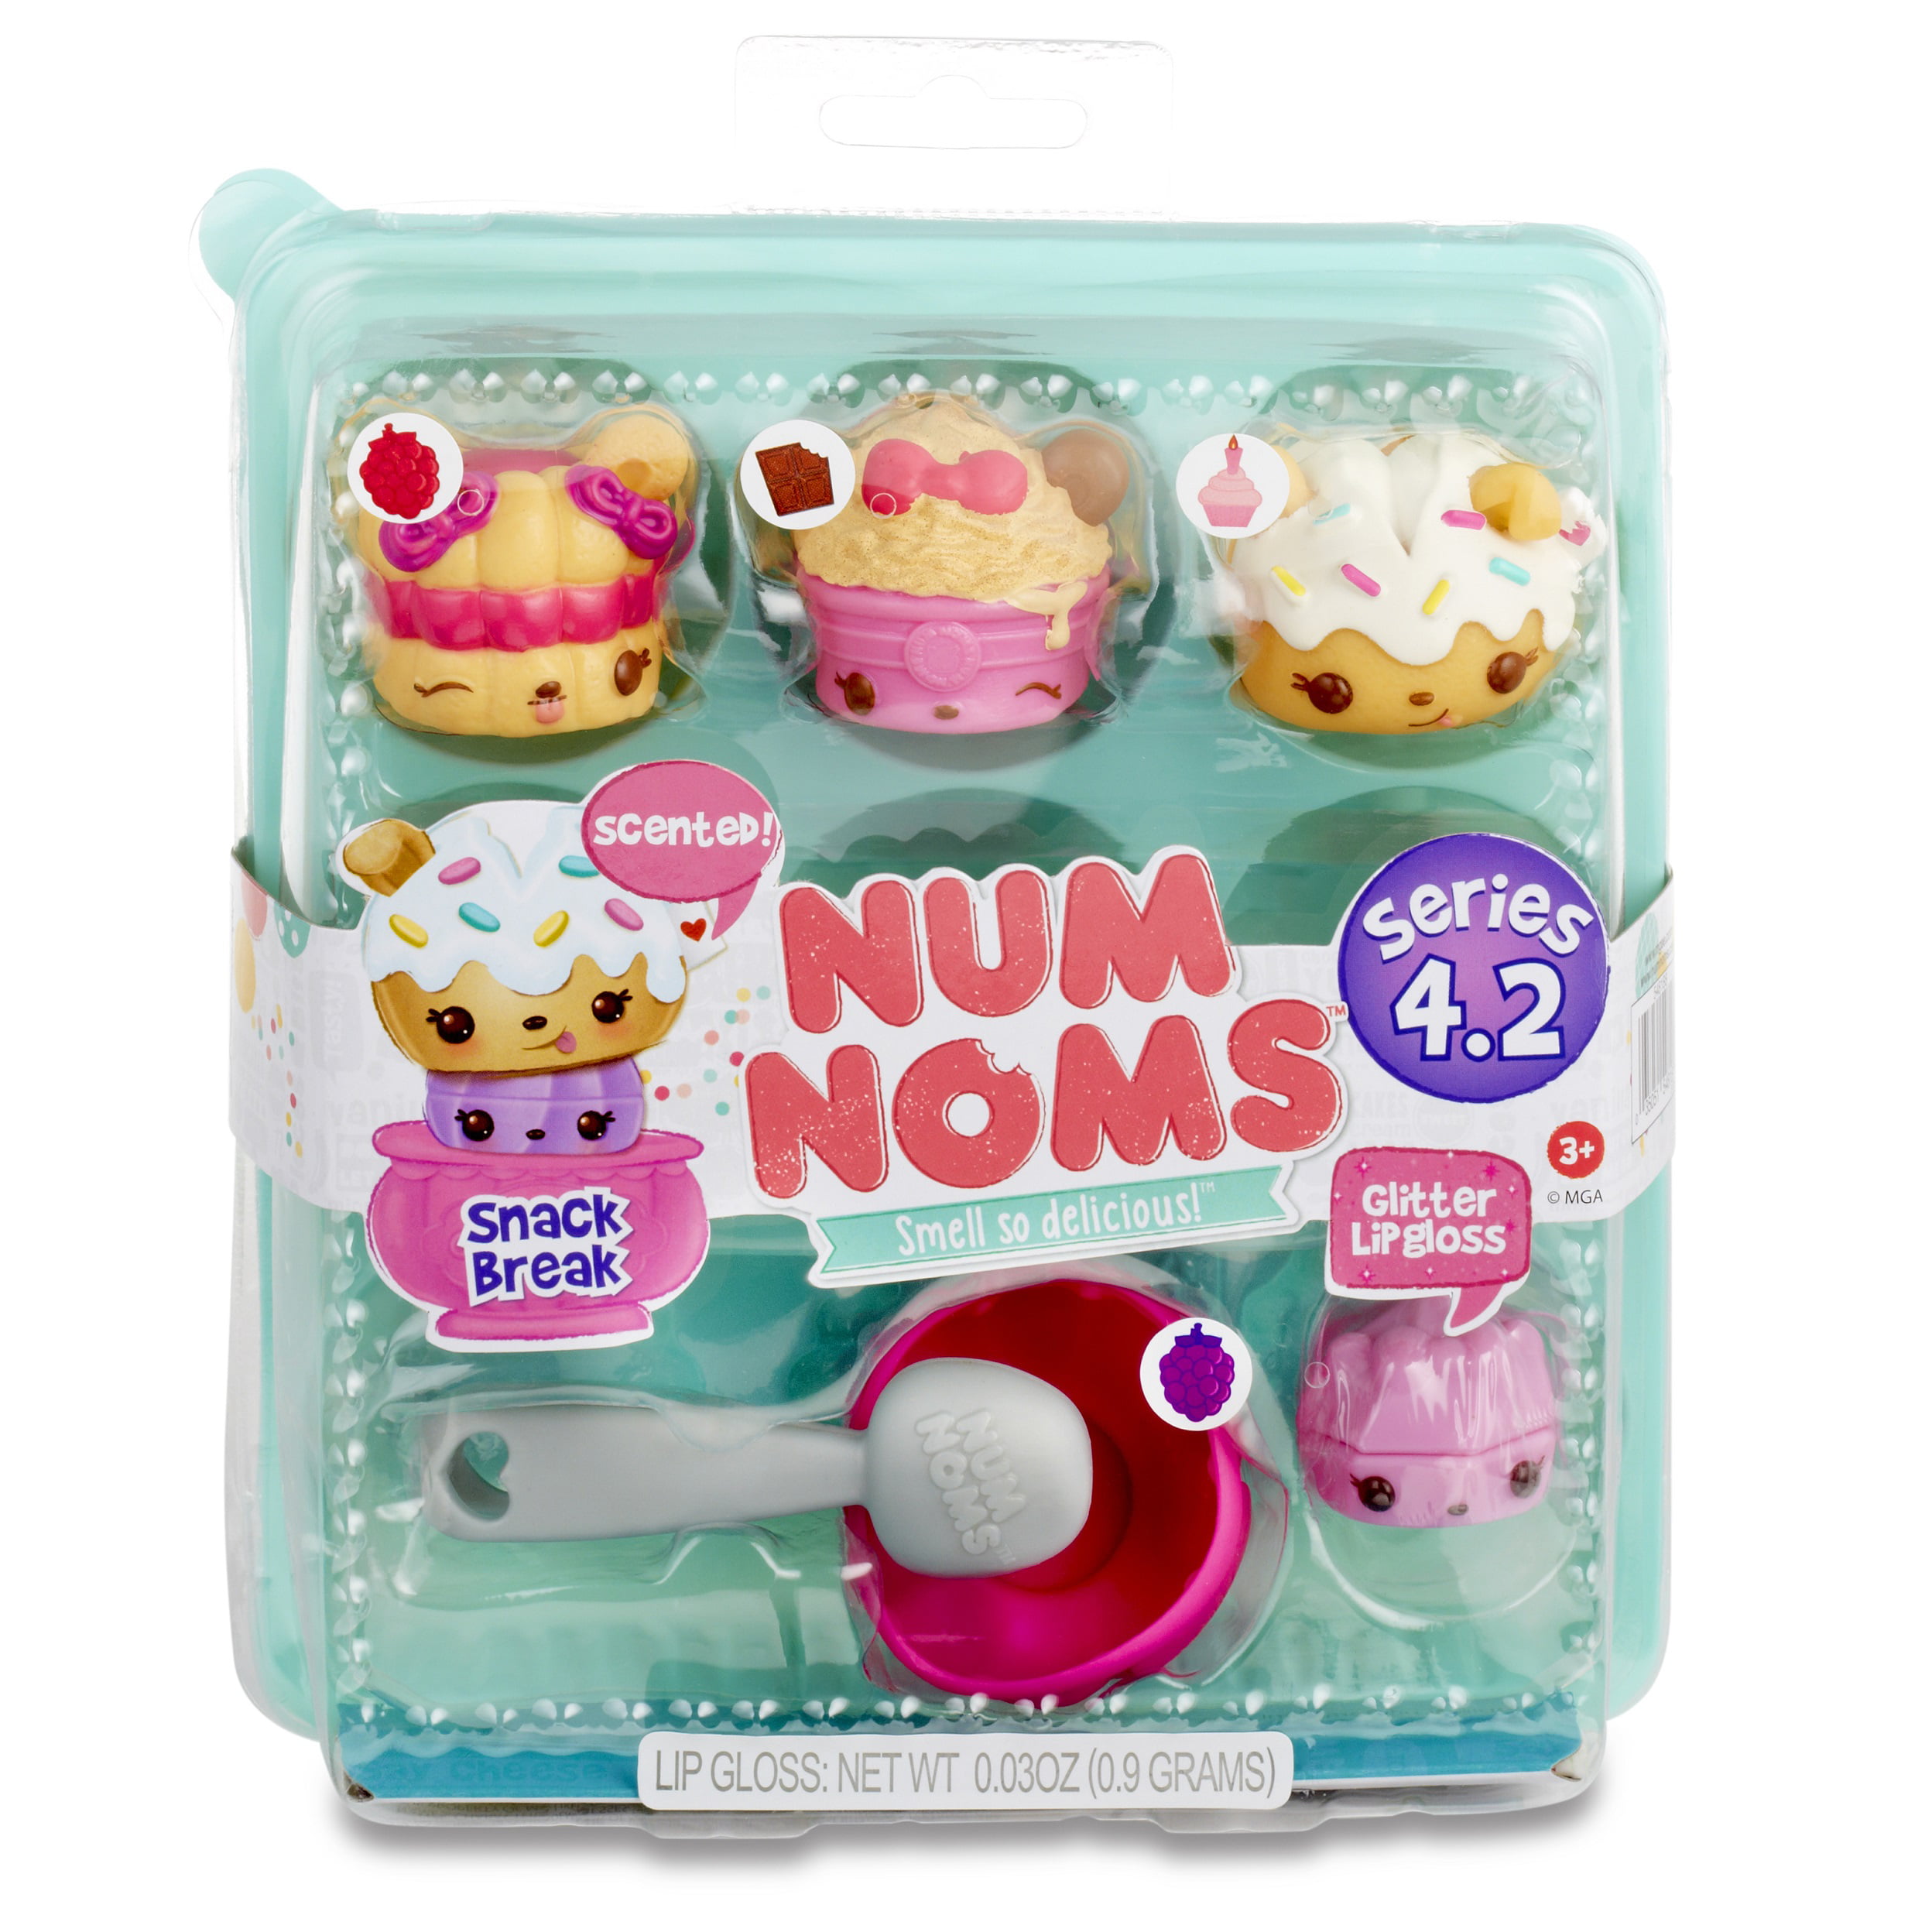 Num Noms Cafe Playset - Baby Budgeting